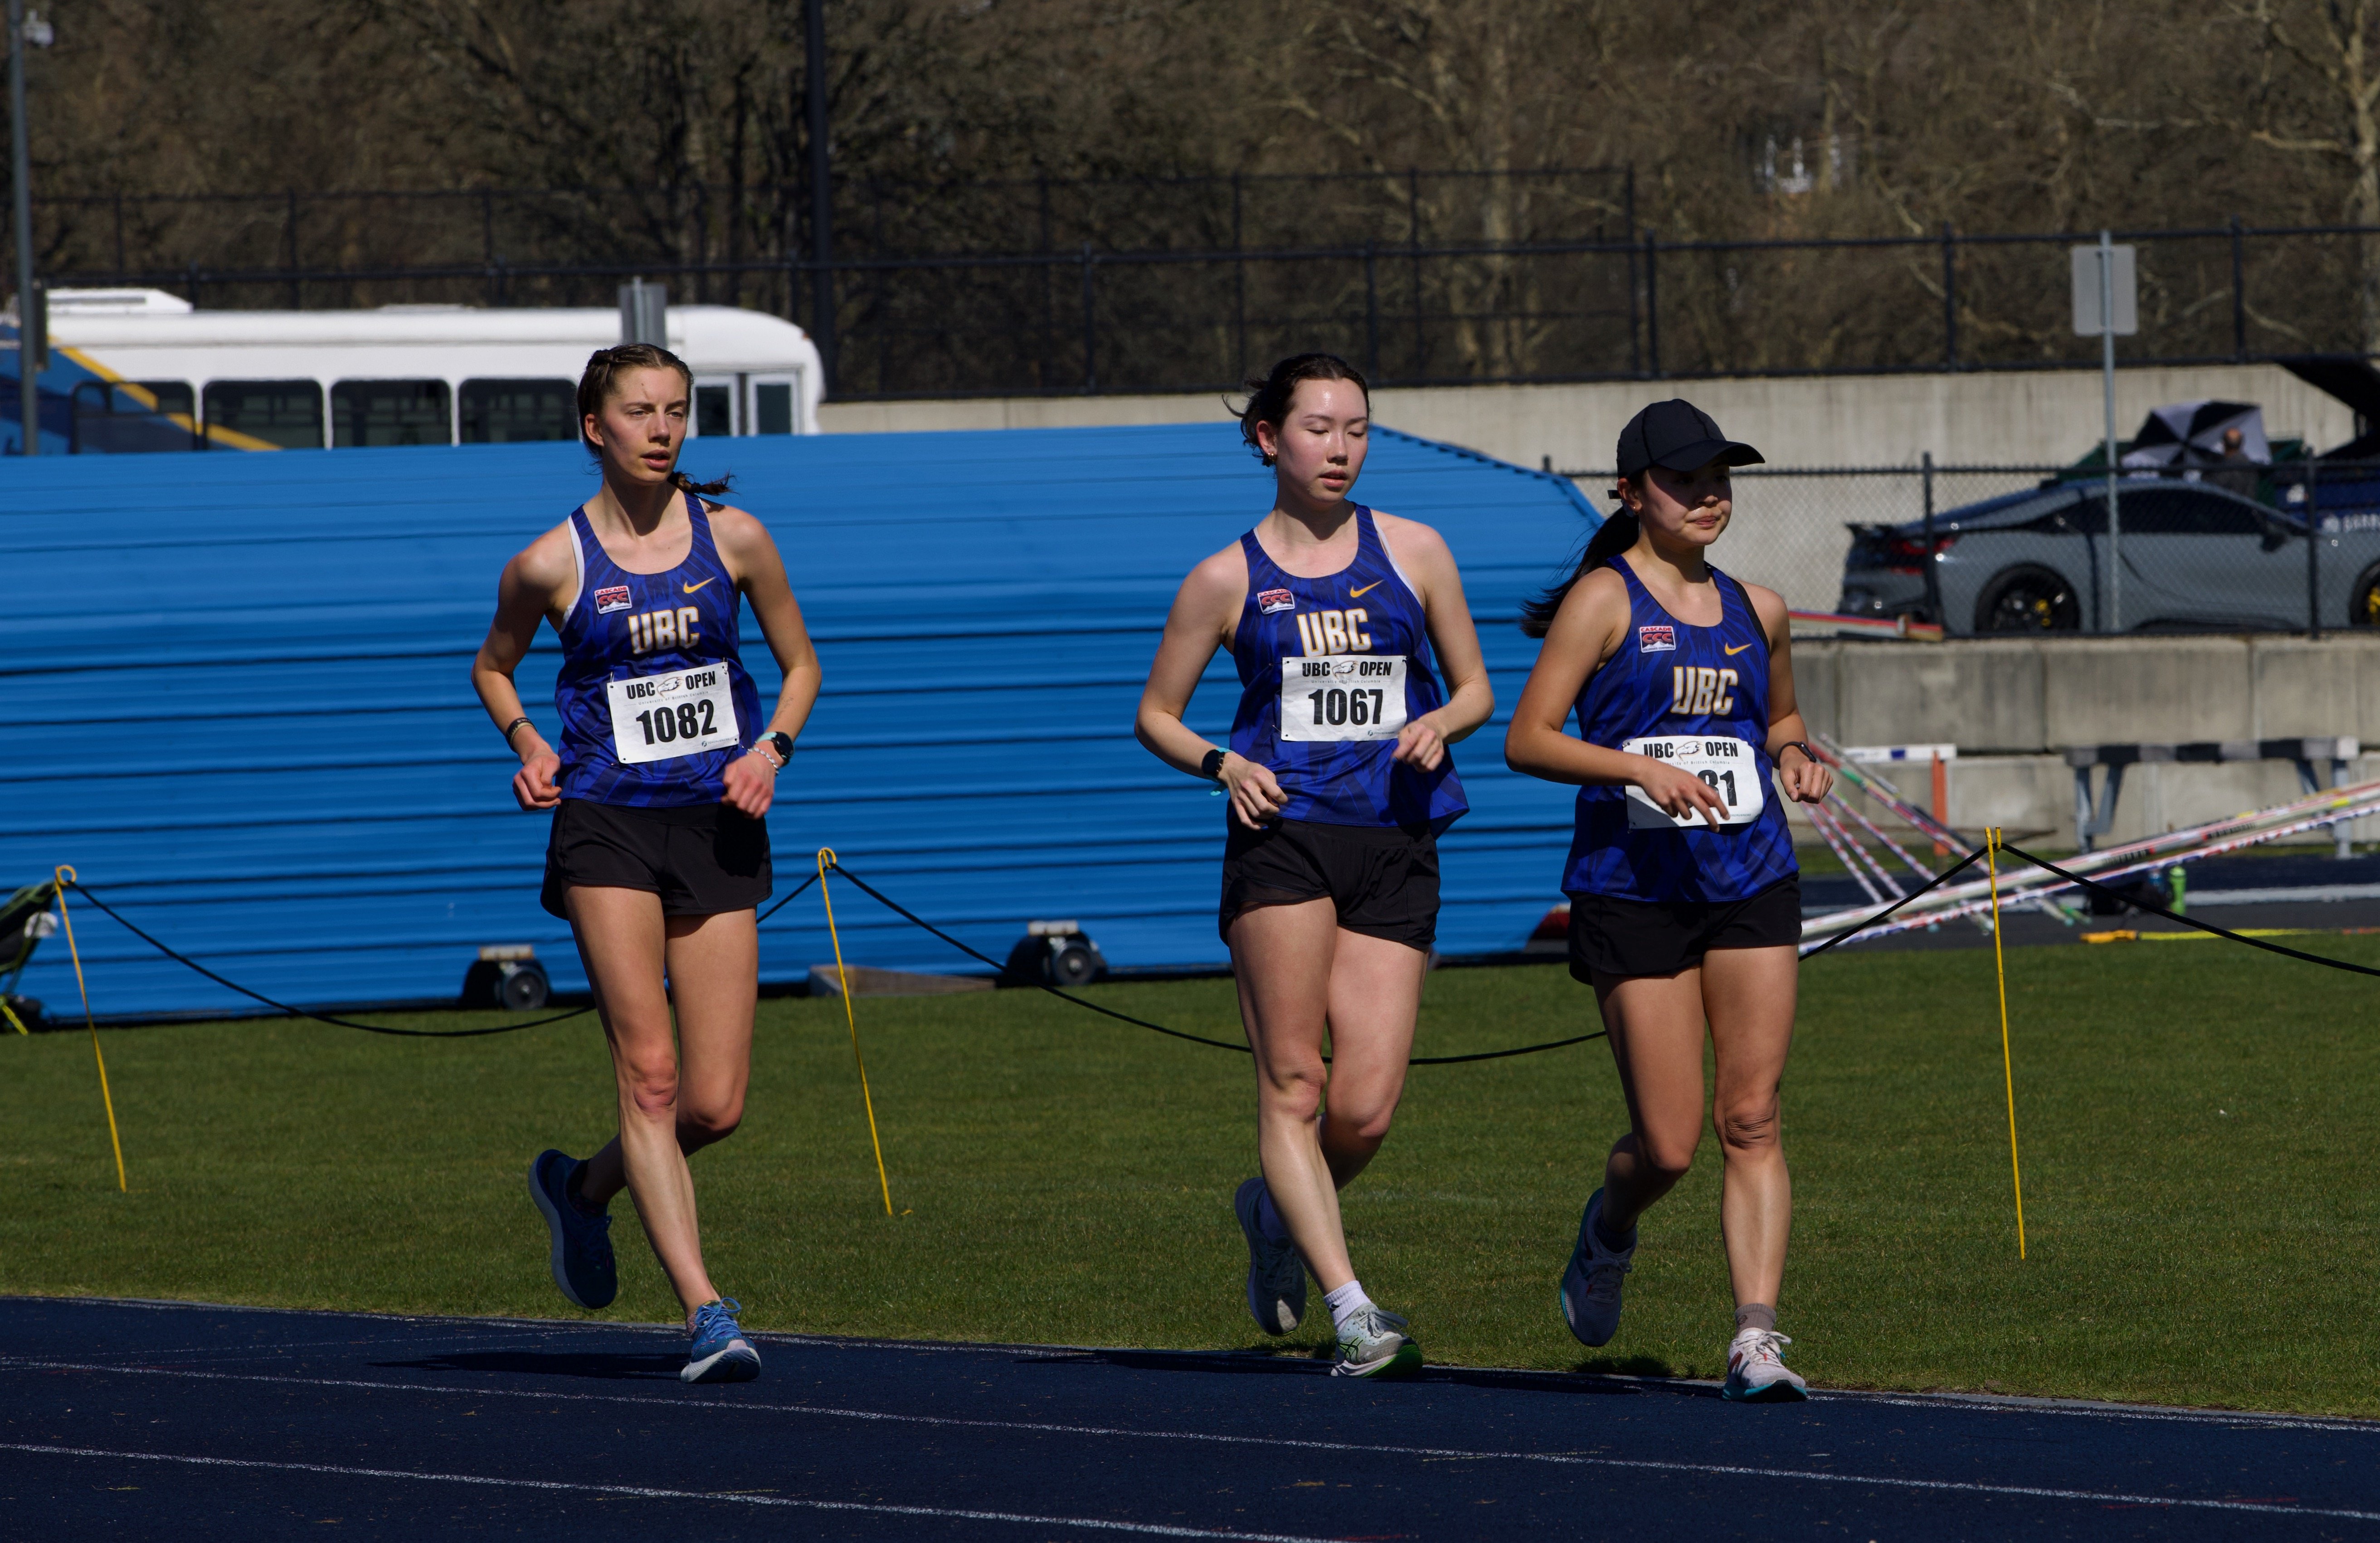 UBC women's race walkers from left to right: Olivia Lundman, Cassidy Cardle and Joean Lu.